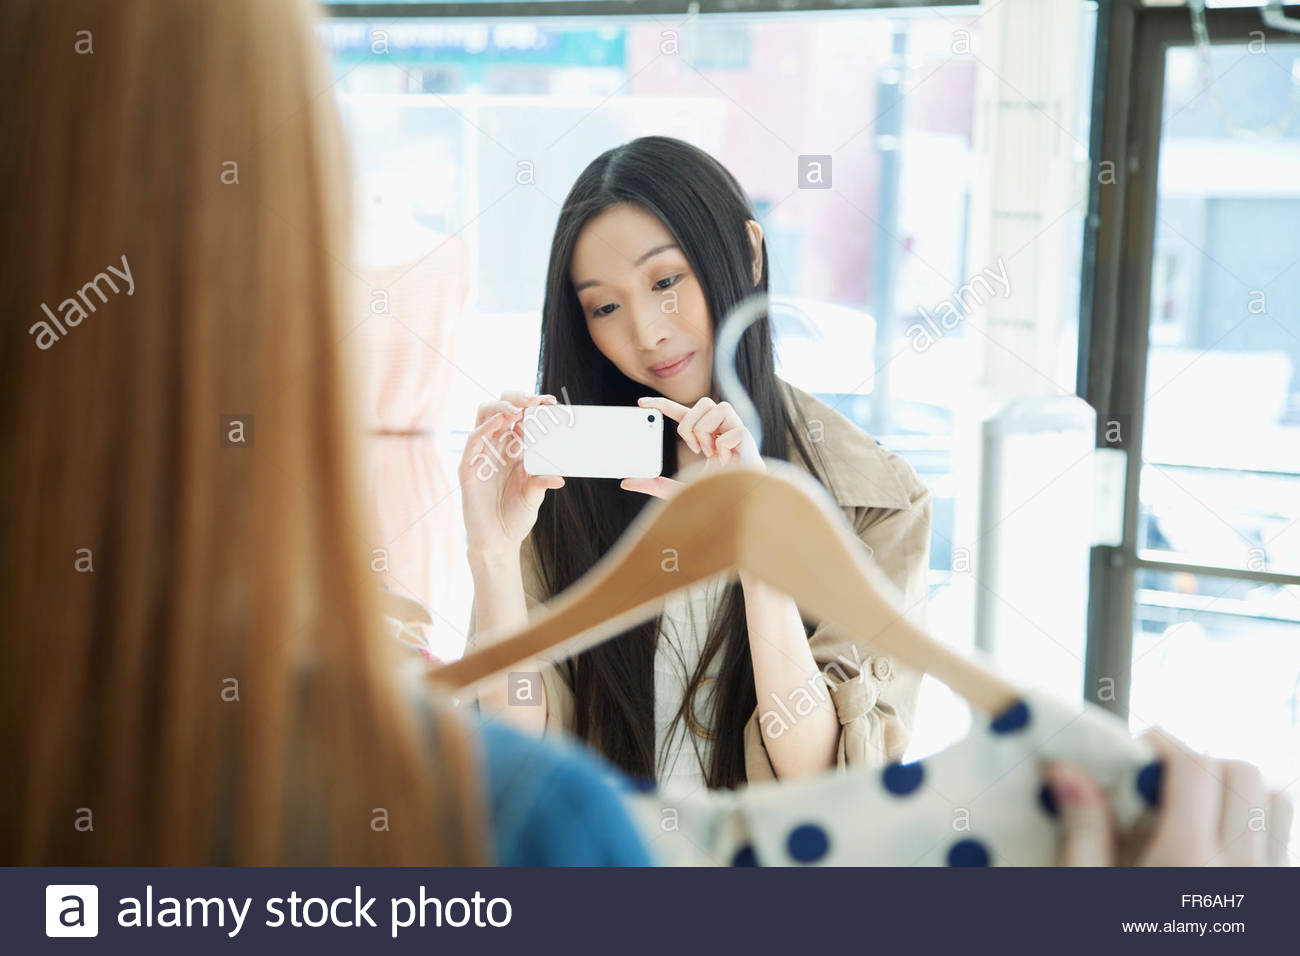 girlfriend taking picture in clothing store Stock Photo - Alamy